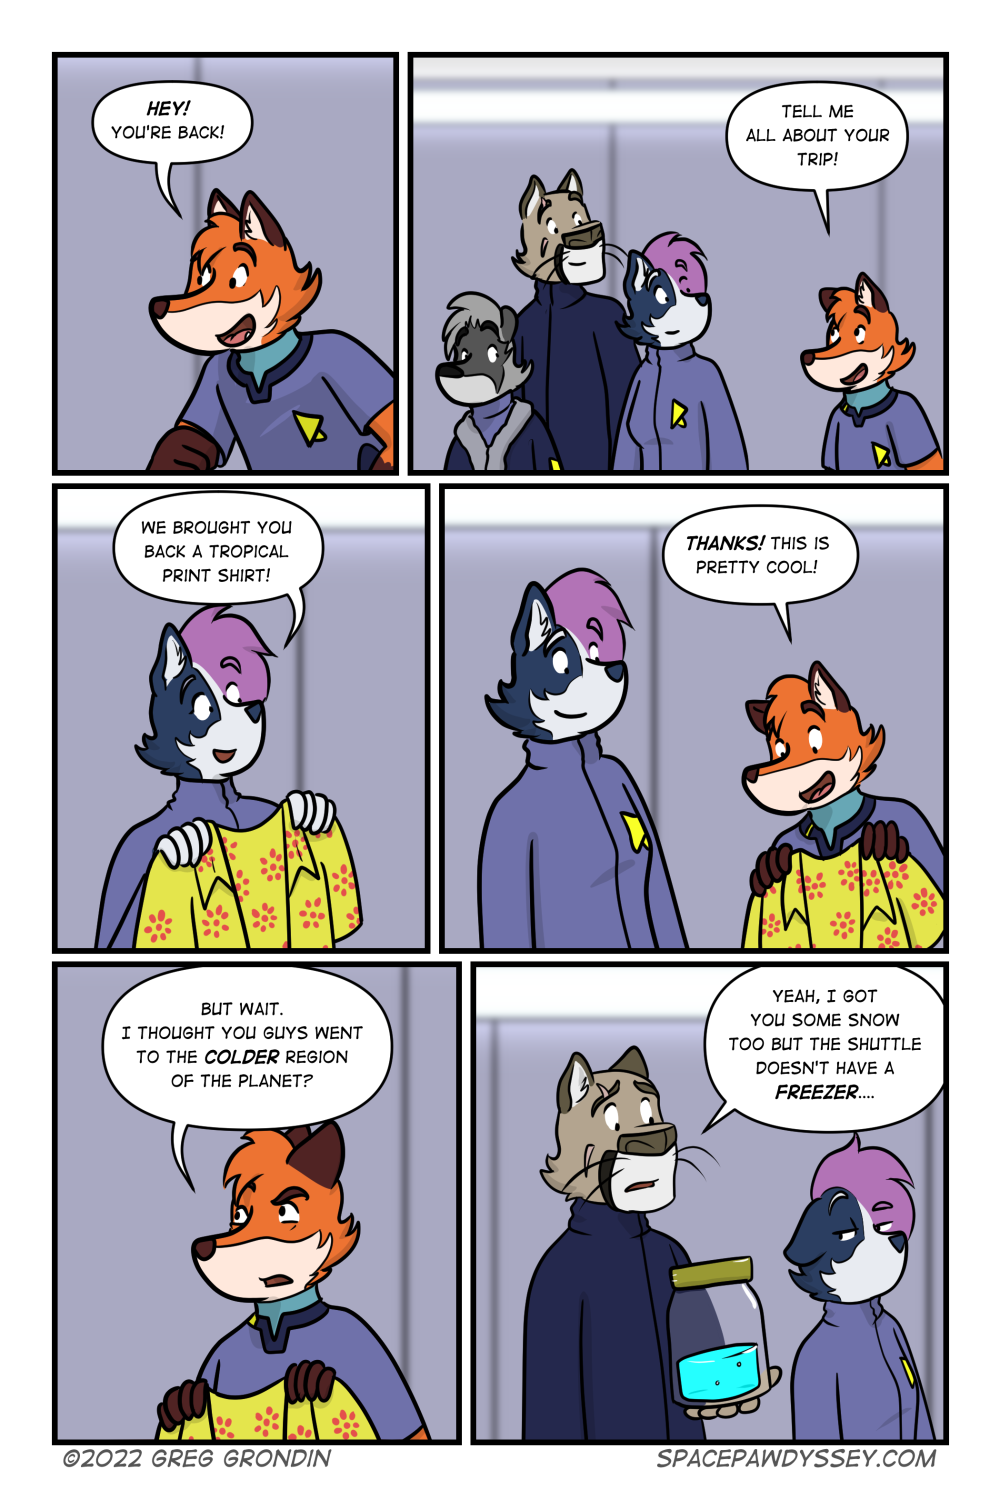 Space Pawdyssey #585